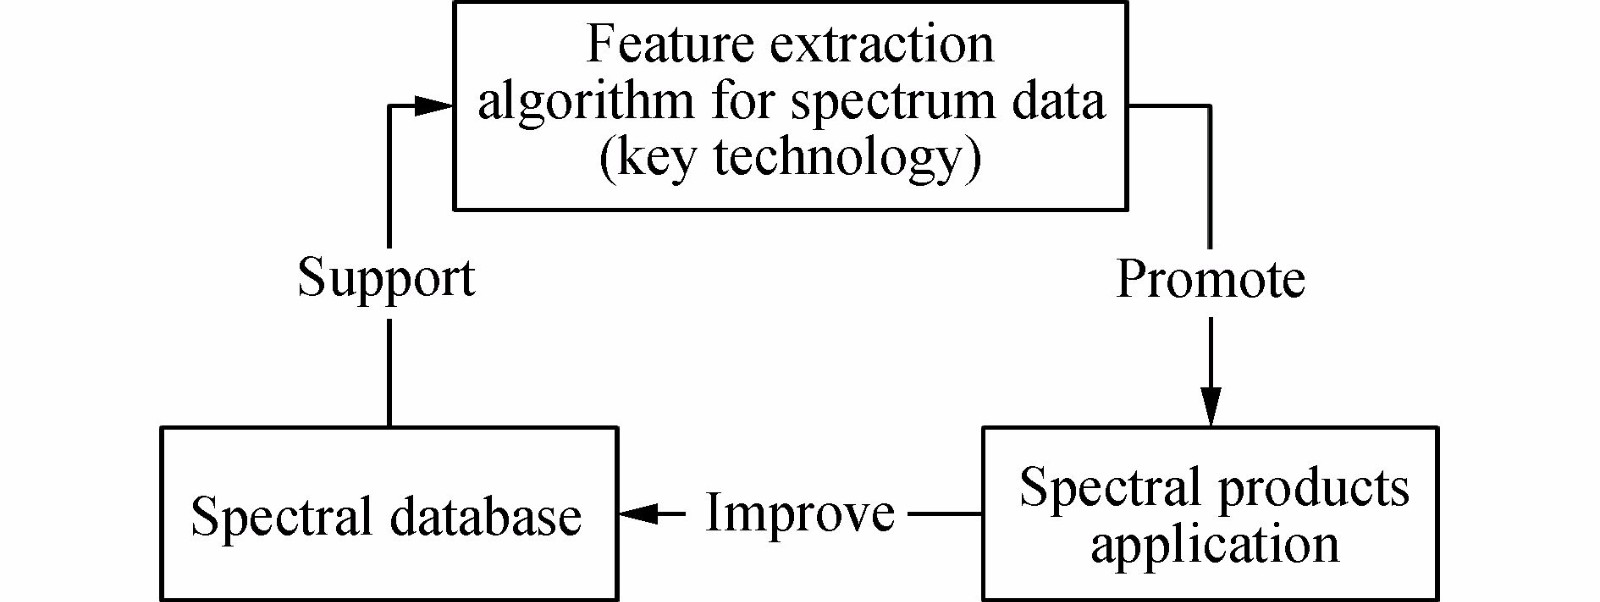 Key technology of spectral data, spectral database and application relationship of spectral products